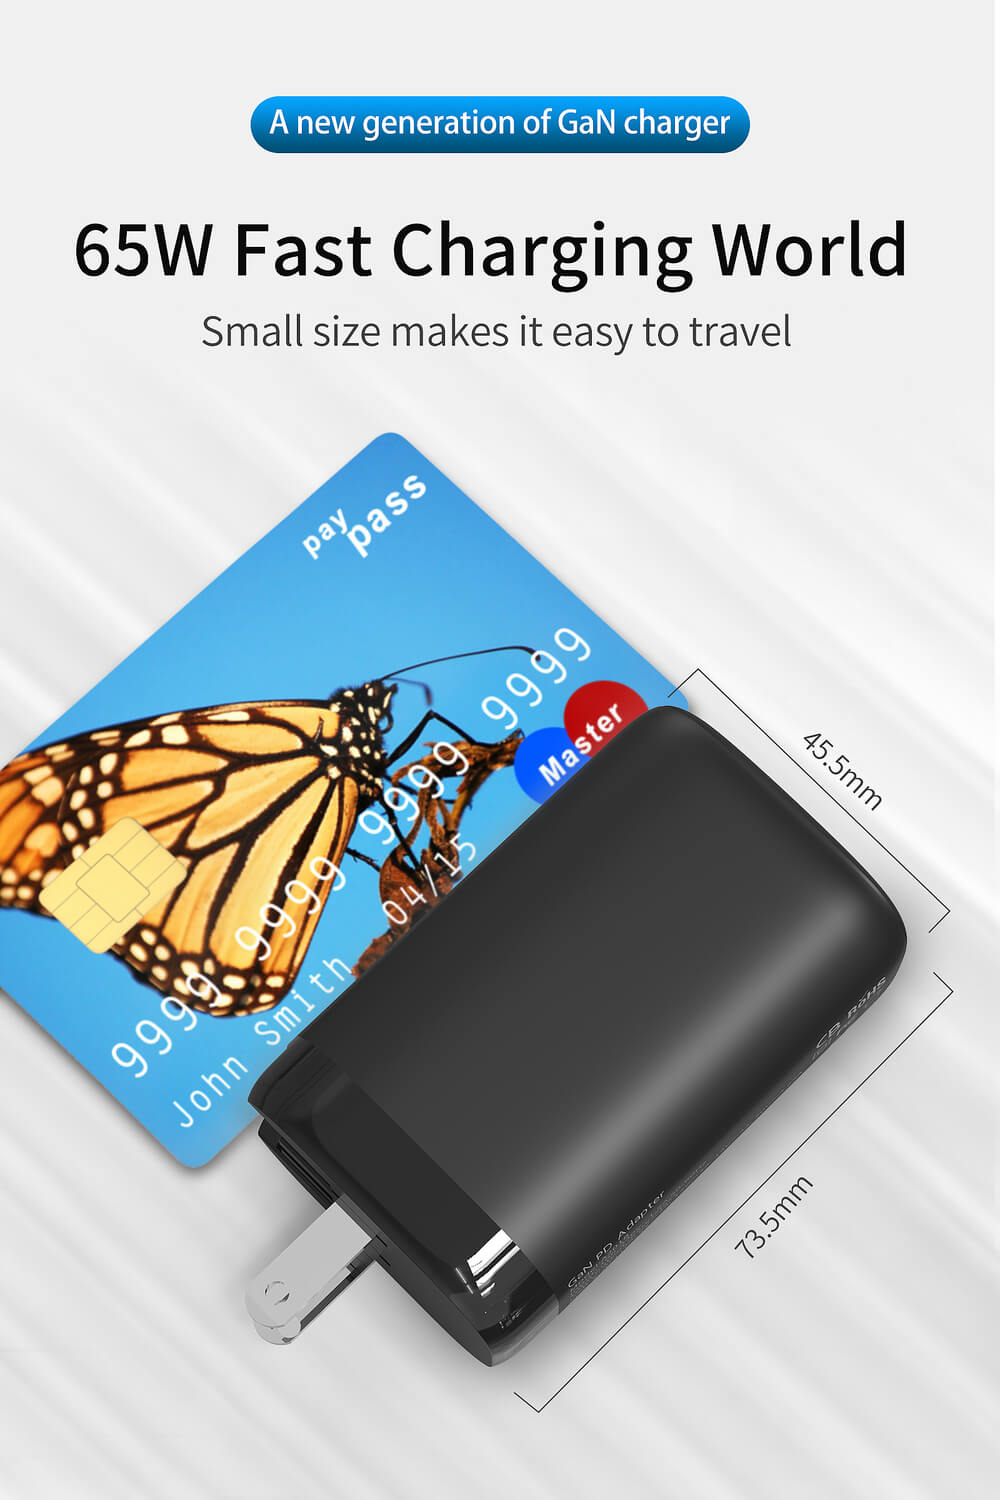 A2018 65 watts usb c charger is the best travel charger with the small size and US foldale plug with EU AU UK converters plugs